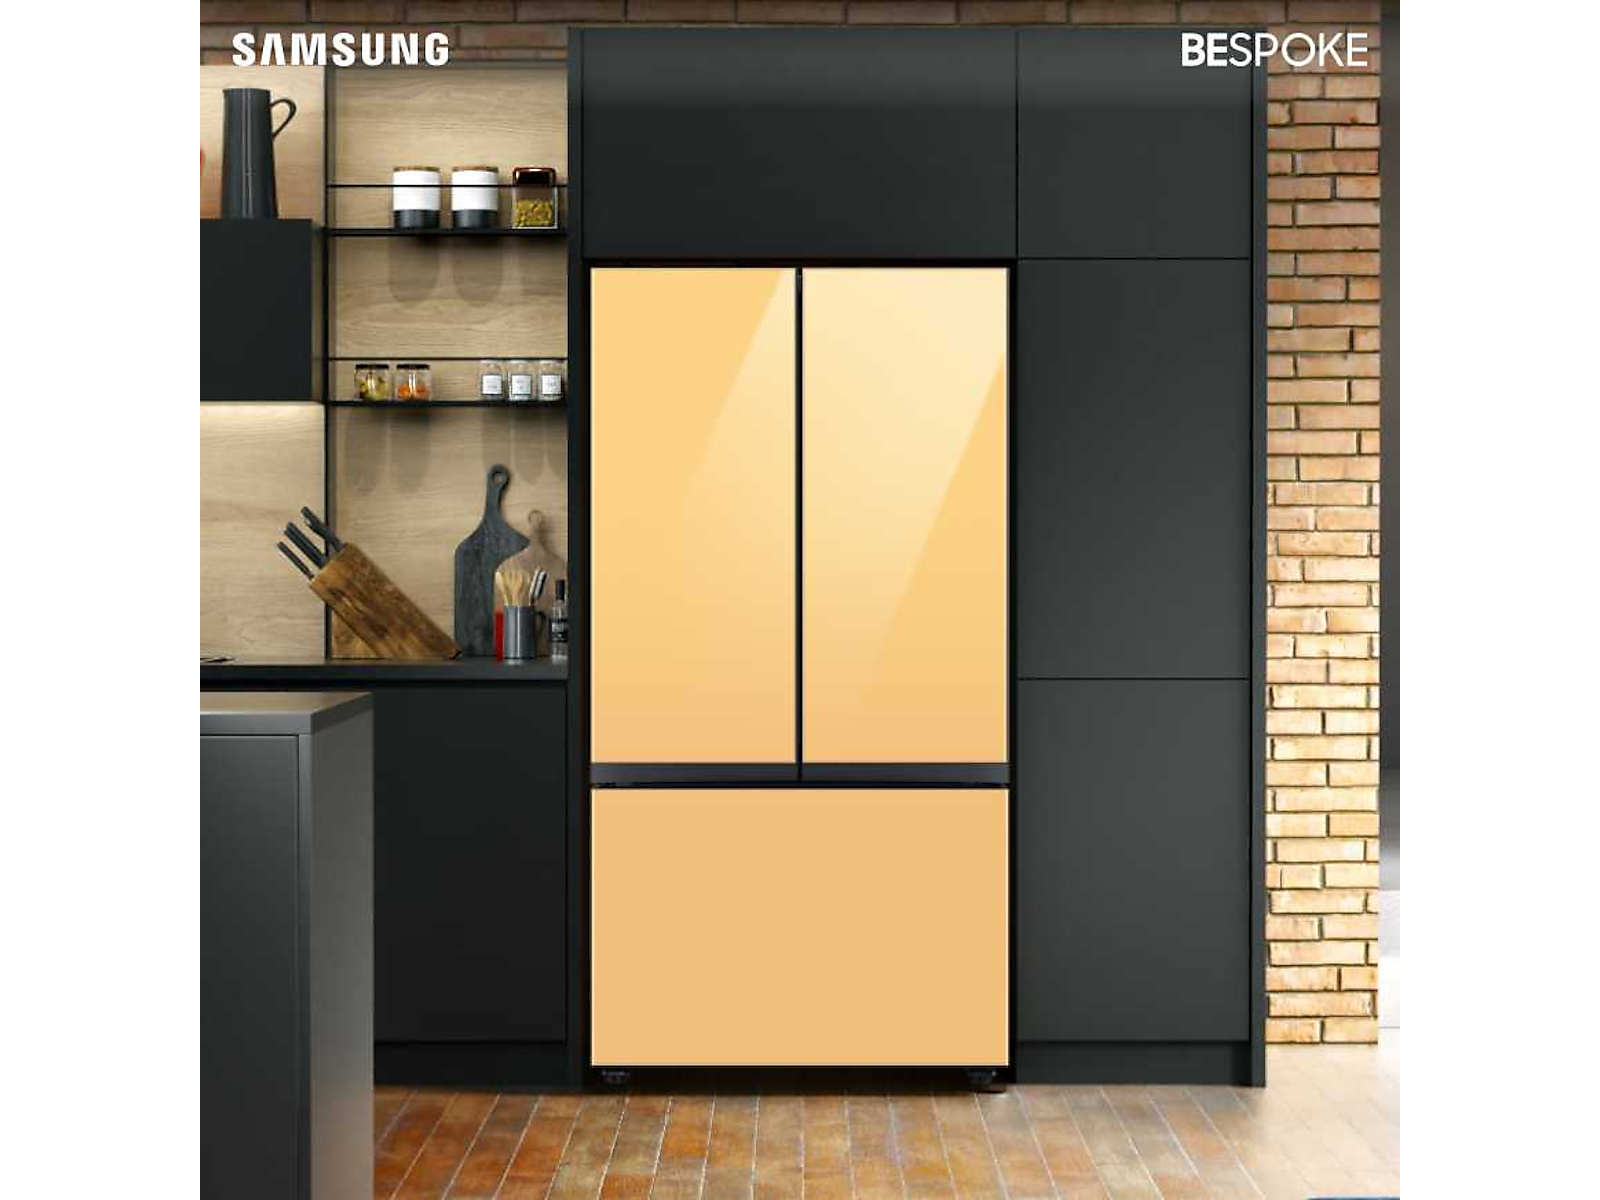 Samsung Bespoke 3-Door French Door Refrigerator (24 cu. ft.) with AutoFill Water Pitcher in Sunrise in Yellow Glass(BNDL-1650466837735)